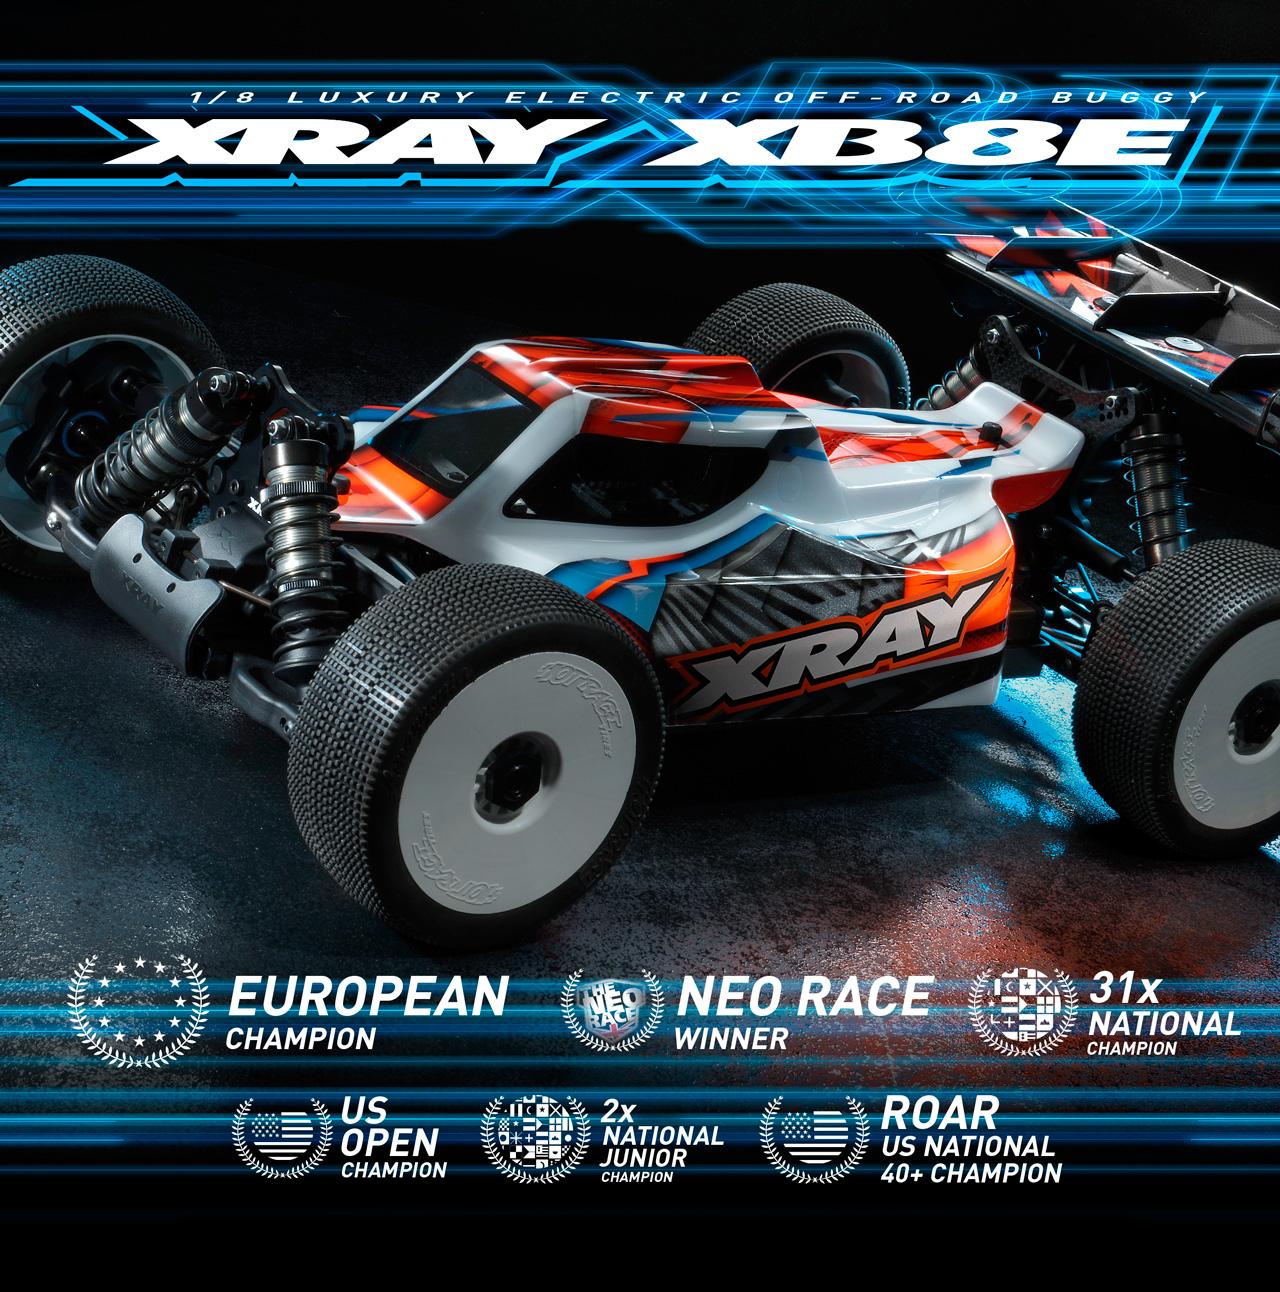 Xray Xb8E 2022: Expert and enthusiast-approved: The Stunning Speed and Performance of the xray xb8e 2022.